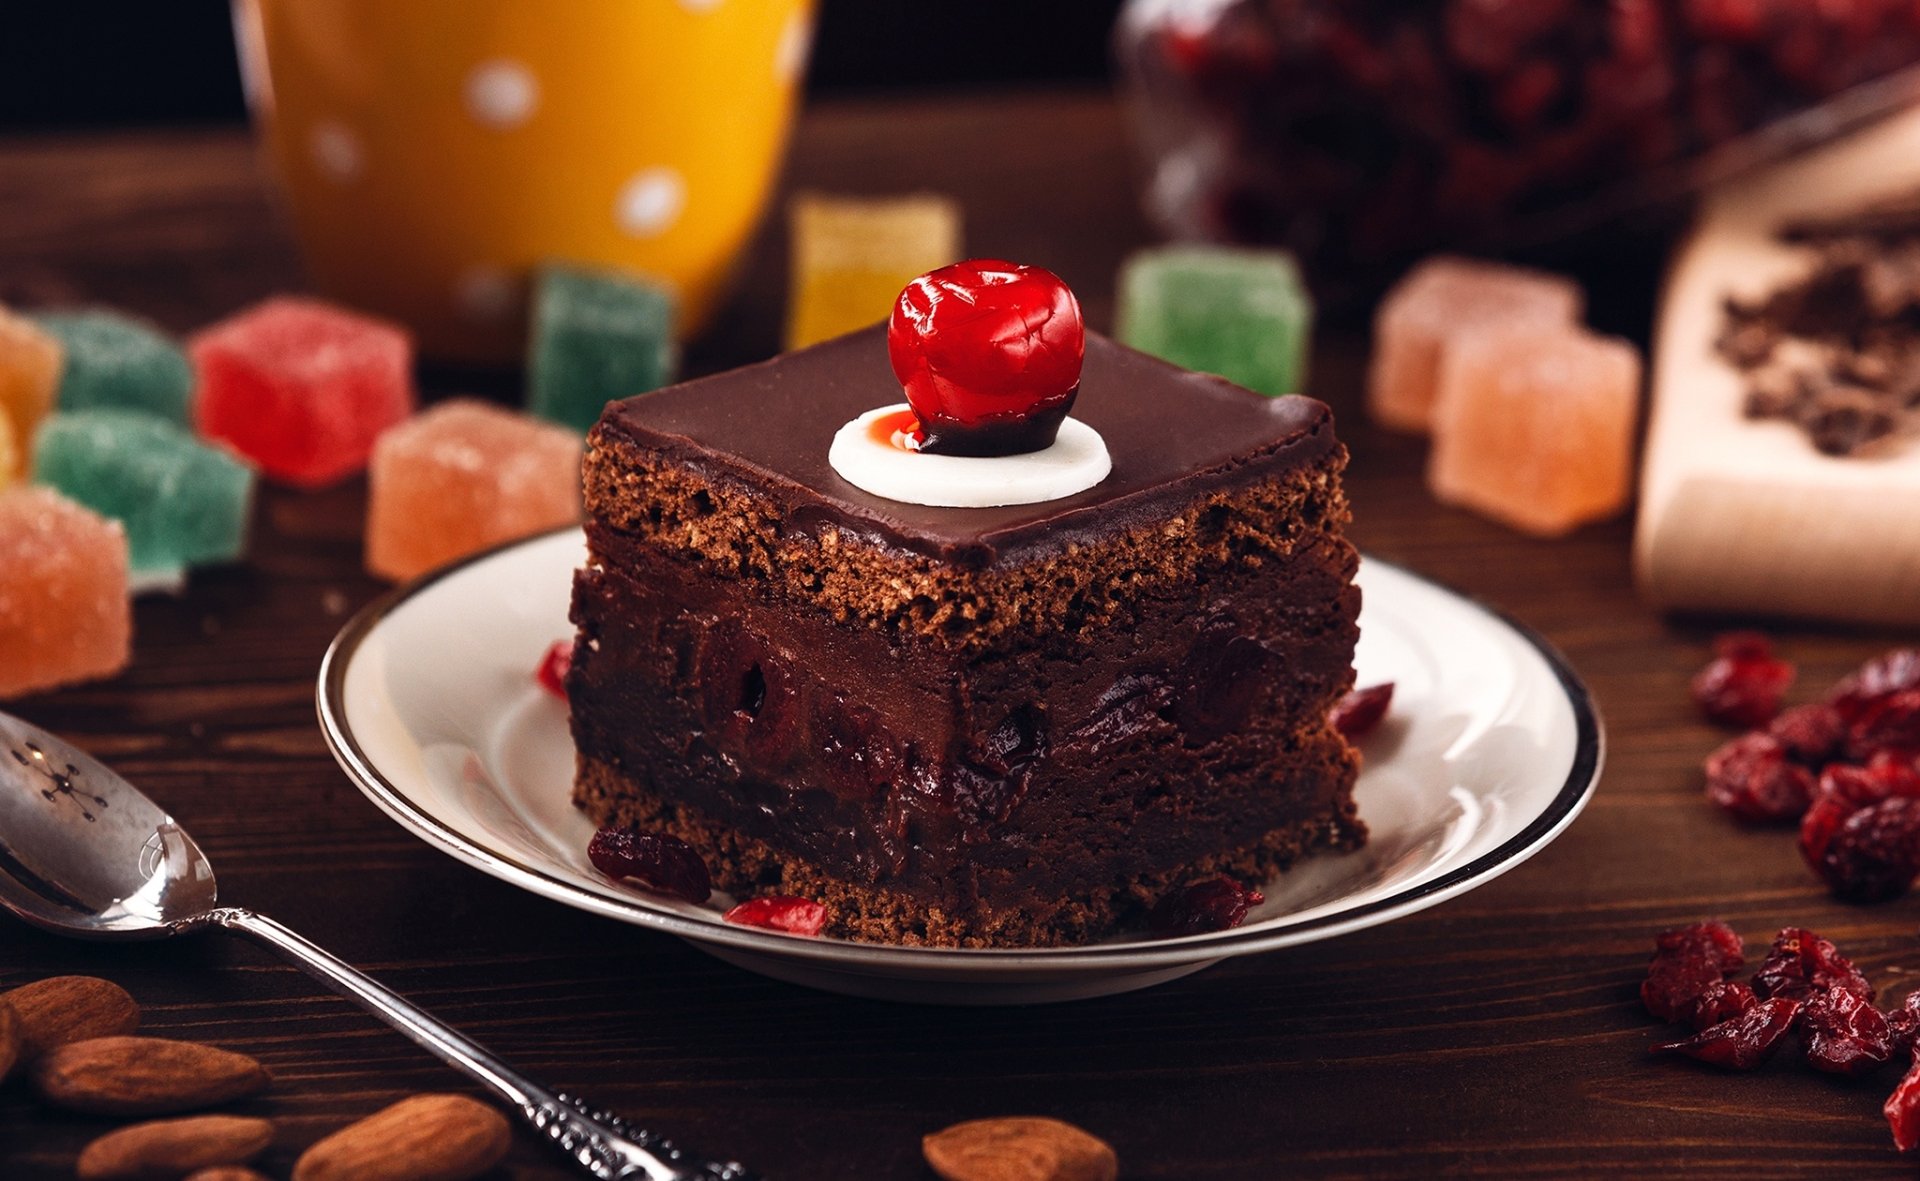 Chocolate Cake with a Cherry on Top